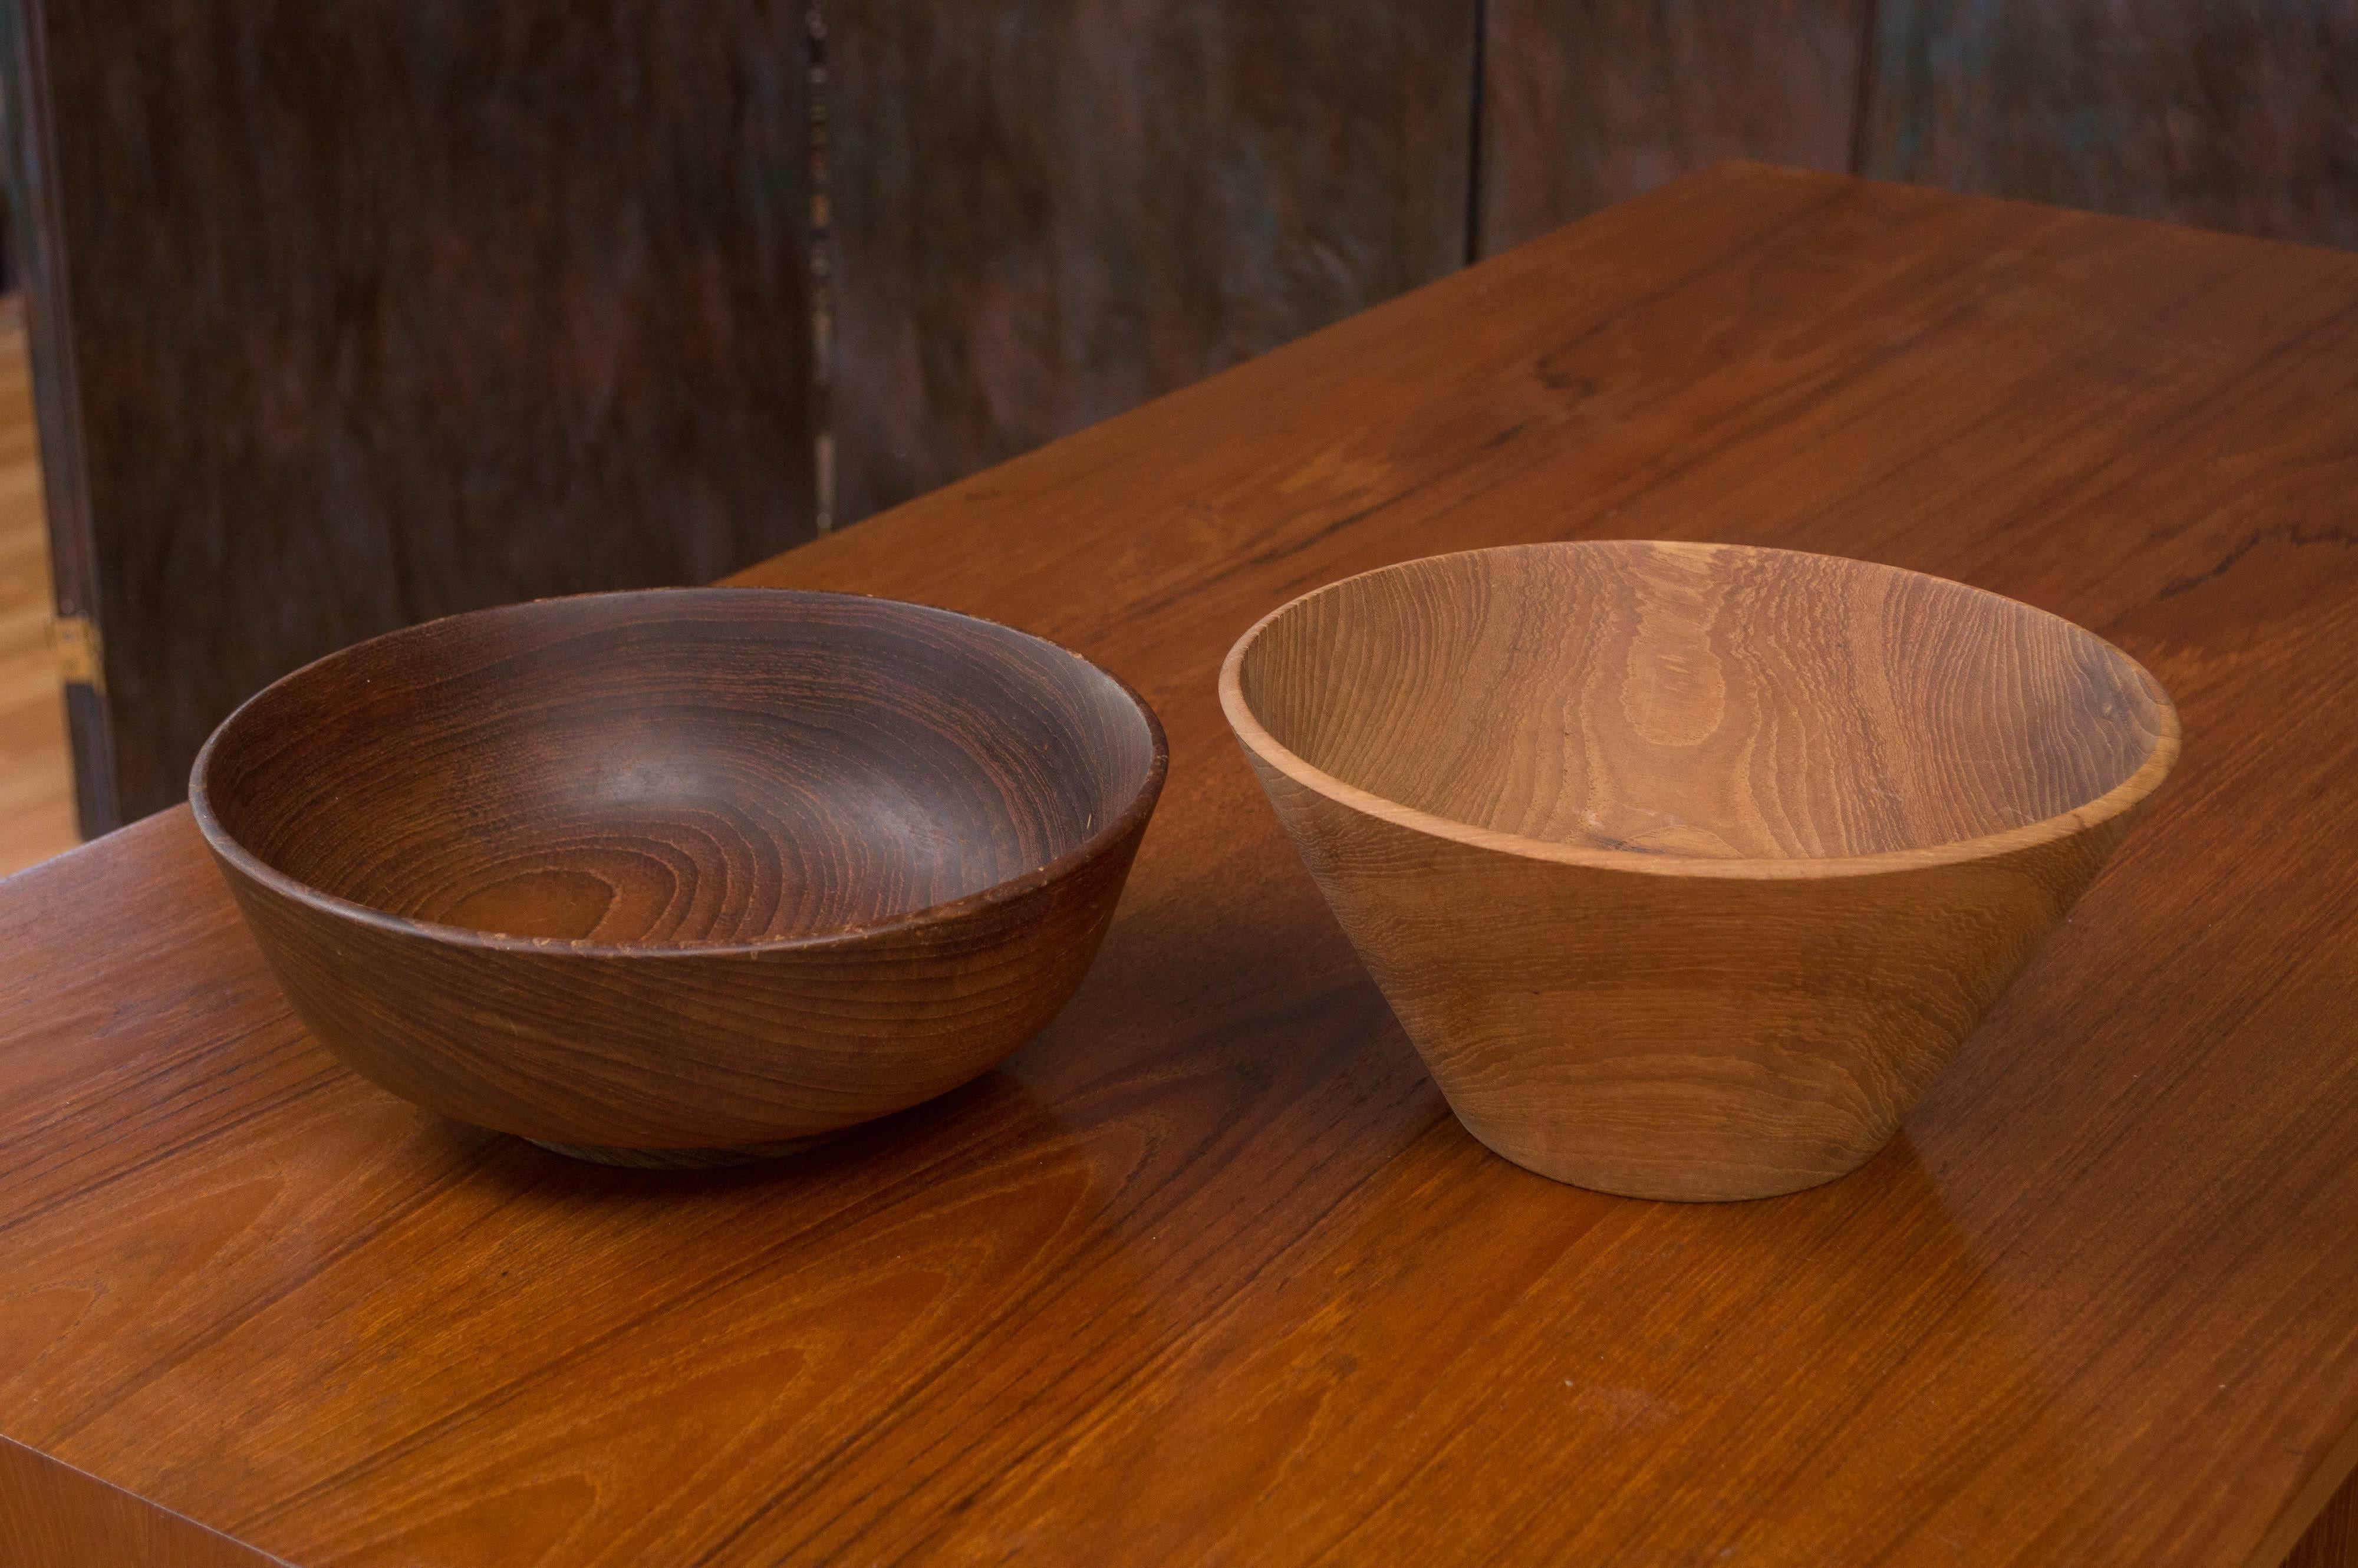 A pair of highly collectible vintage large turned wood bowls by influential and world-renowned American artist Bob Stocksdale (1913 - 2003), both of which are signed and inscribed “Teak from Thailand” on their base.

Left Bowl:
Circa 1960s
This